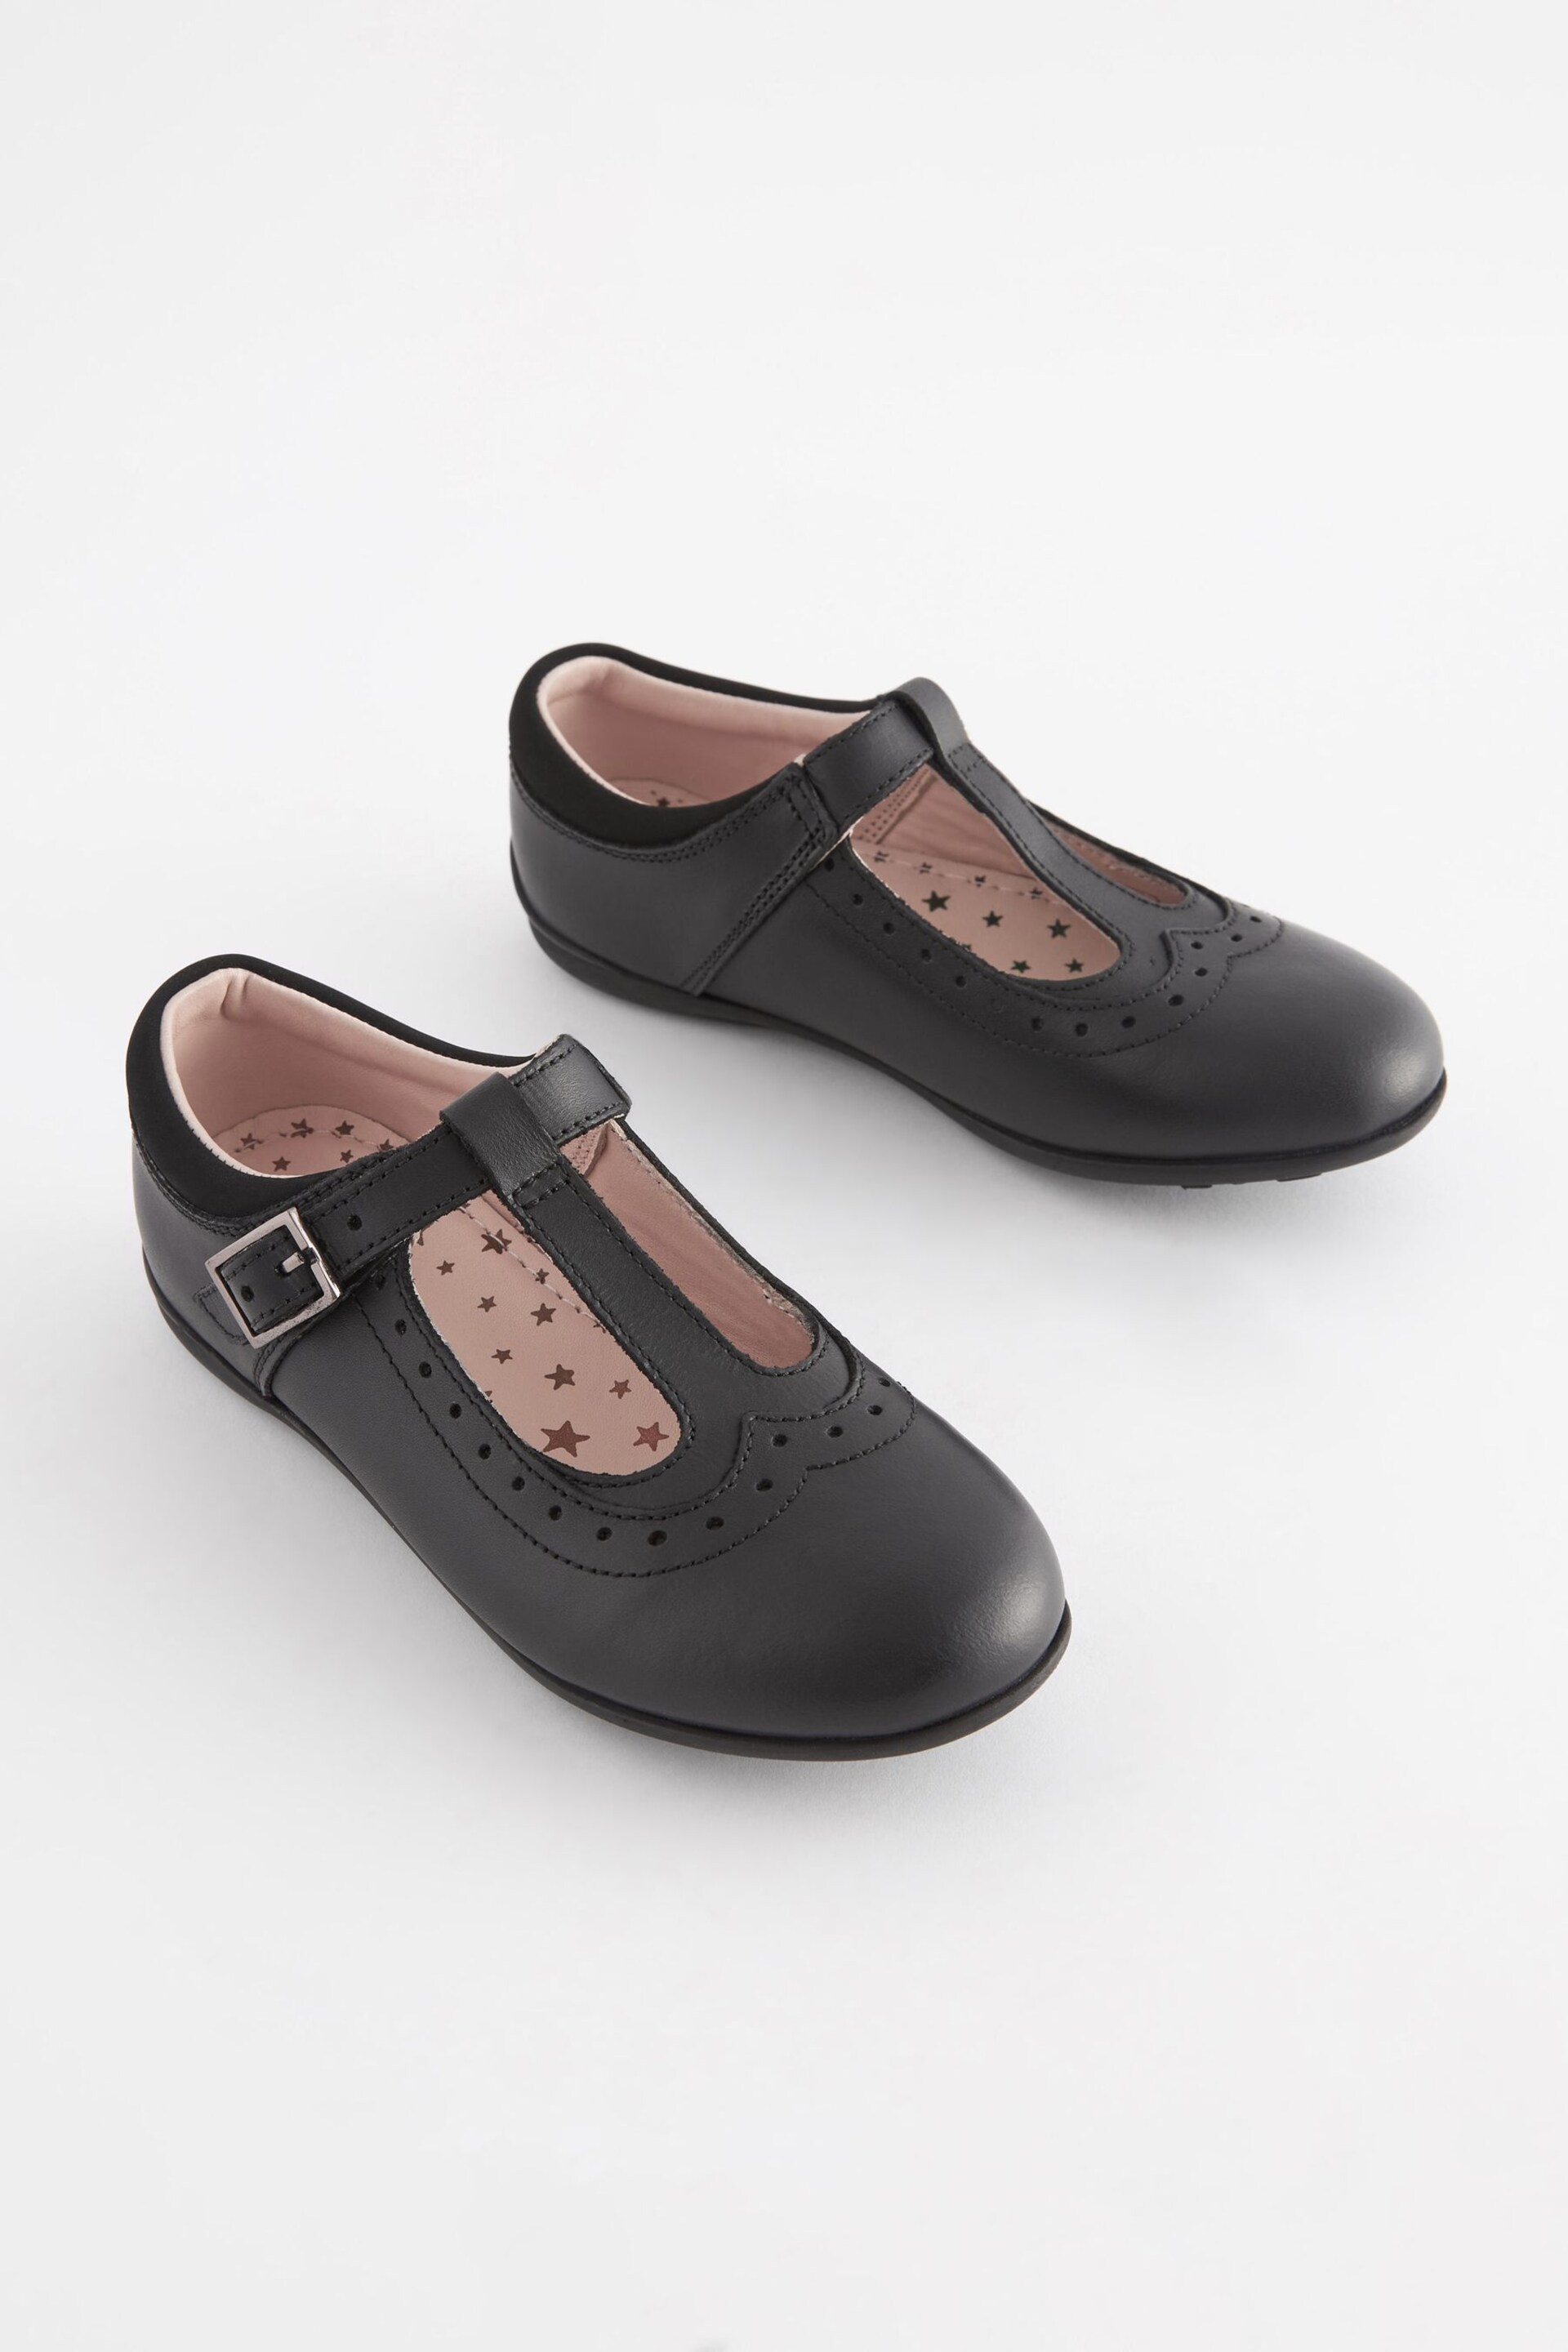 Black Standard Fit (F) Leather T-Bar Leather Shoes - Image 1 of 5